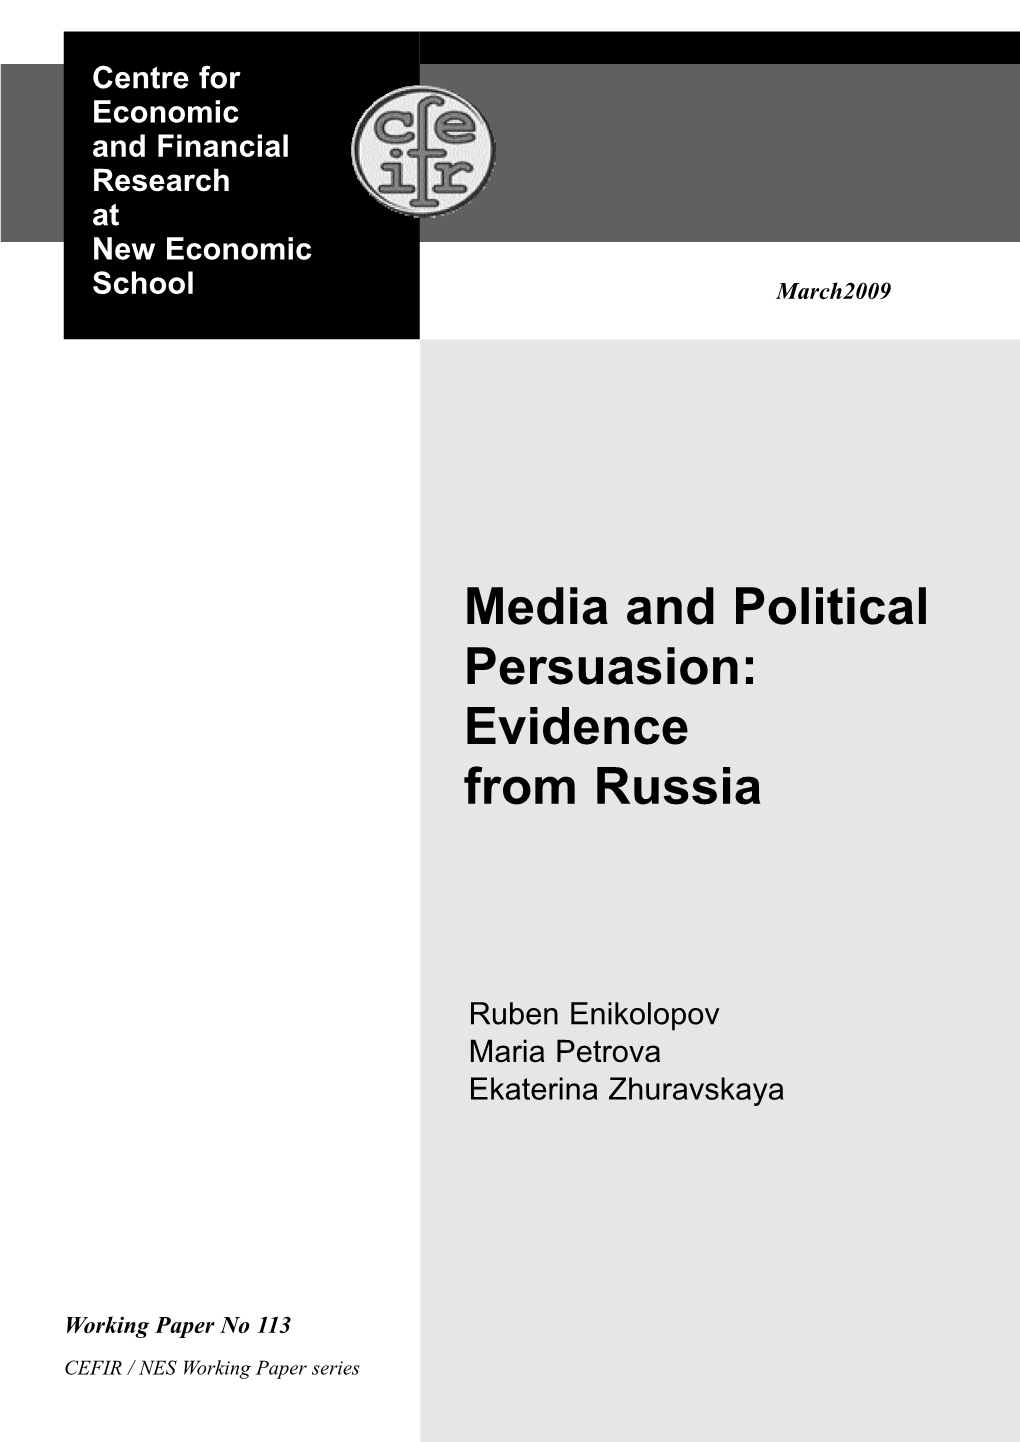 Media and Political Persuasion: Evidence from Russia